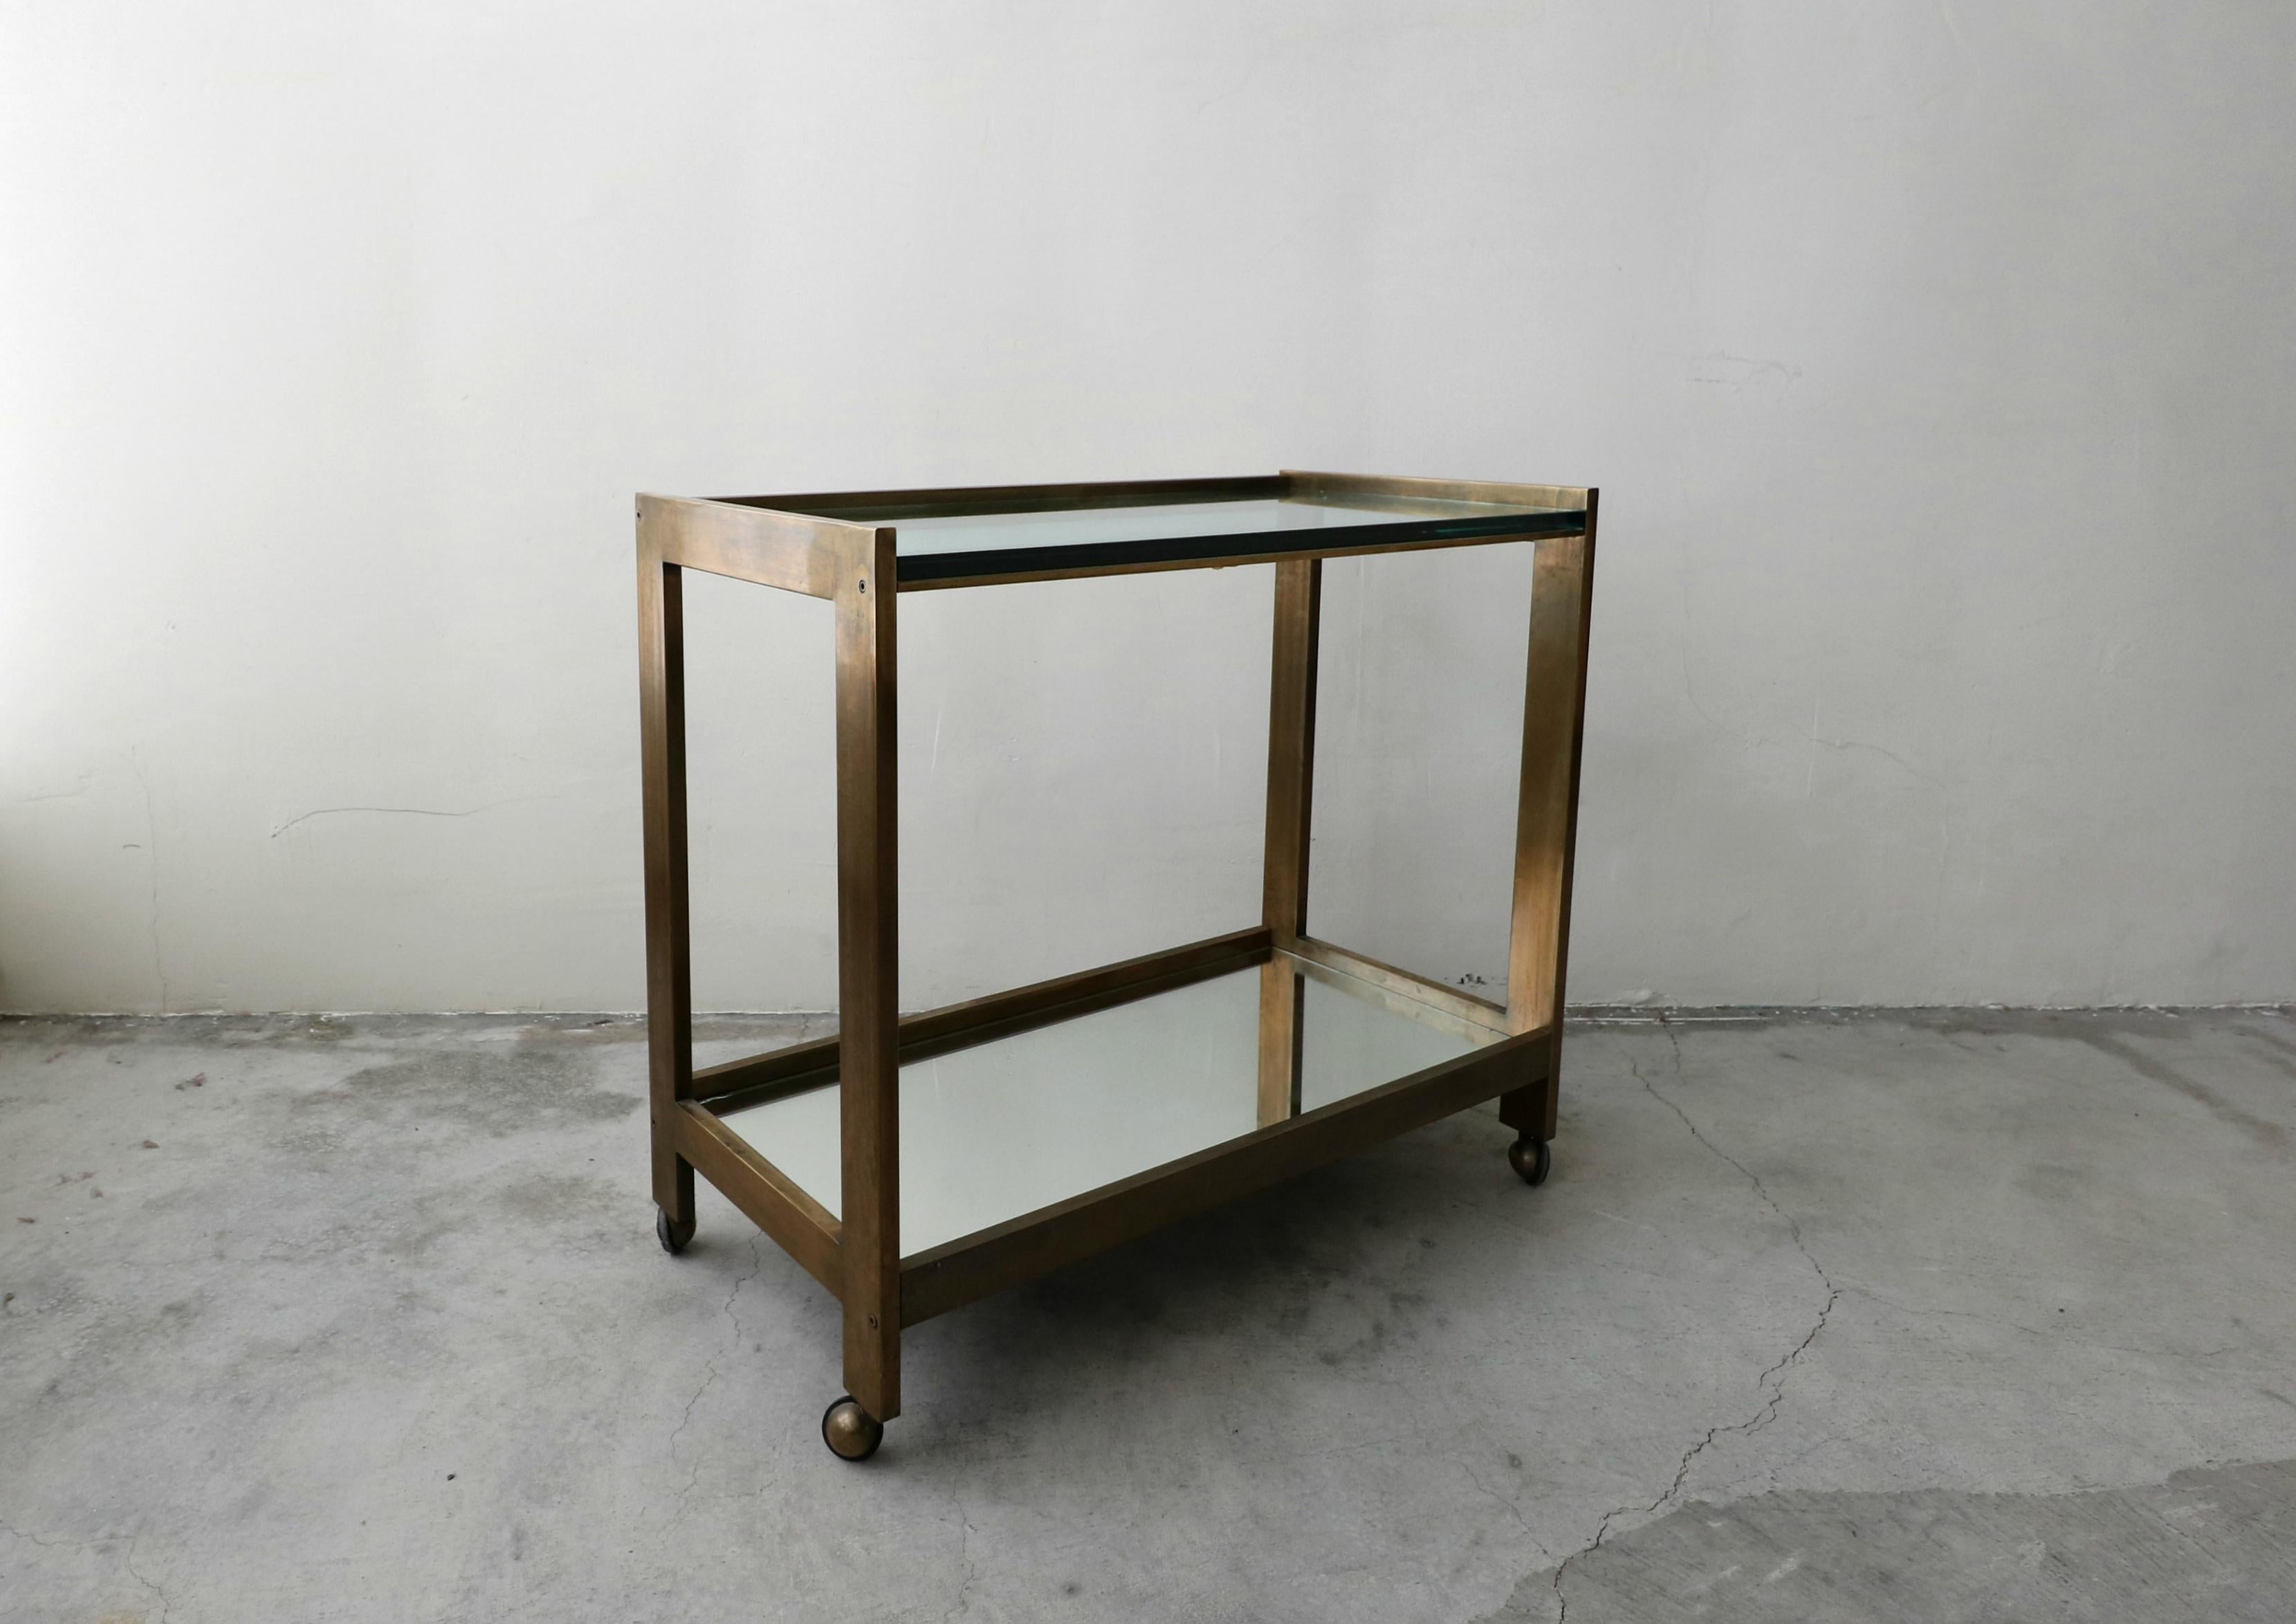 An entertainer's dream, simple yet sophisticated. A stunning, high quality bronze, glass and mirror midcentury bar car. The transparency of this piece makes it perfect in most any space. With two tiers, the top one glass and the bottom one mirror.